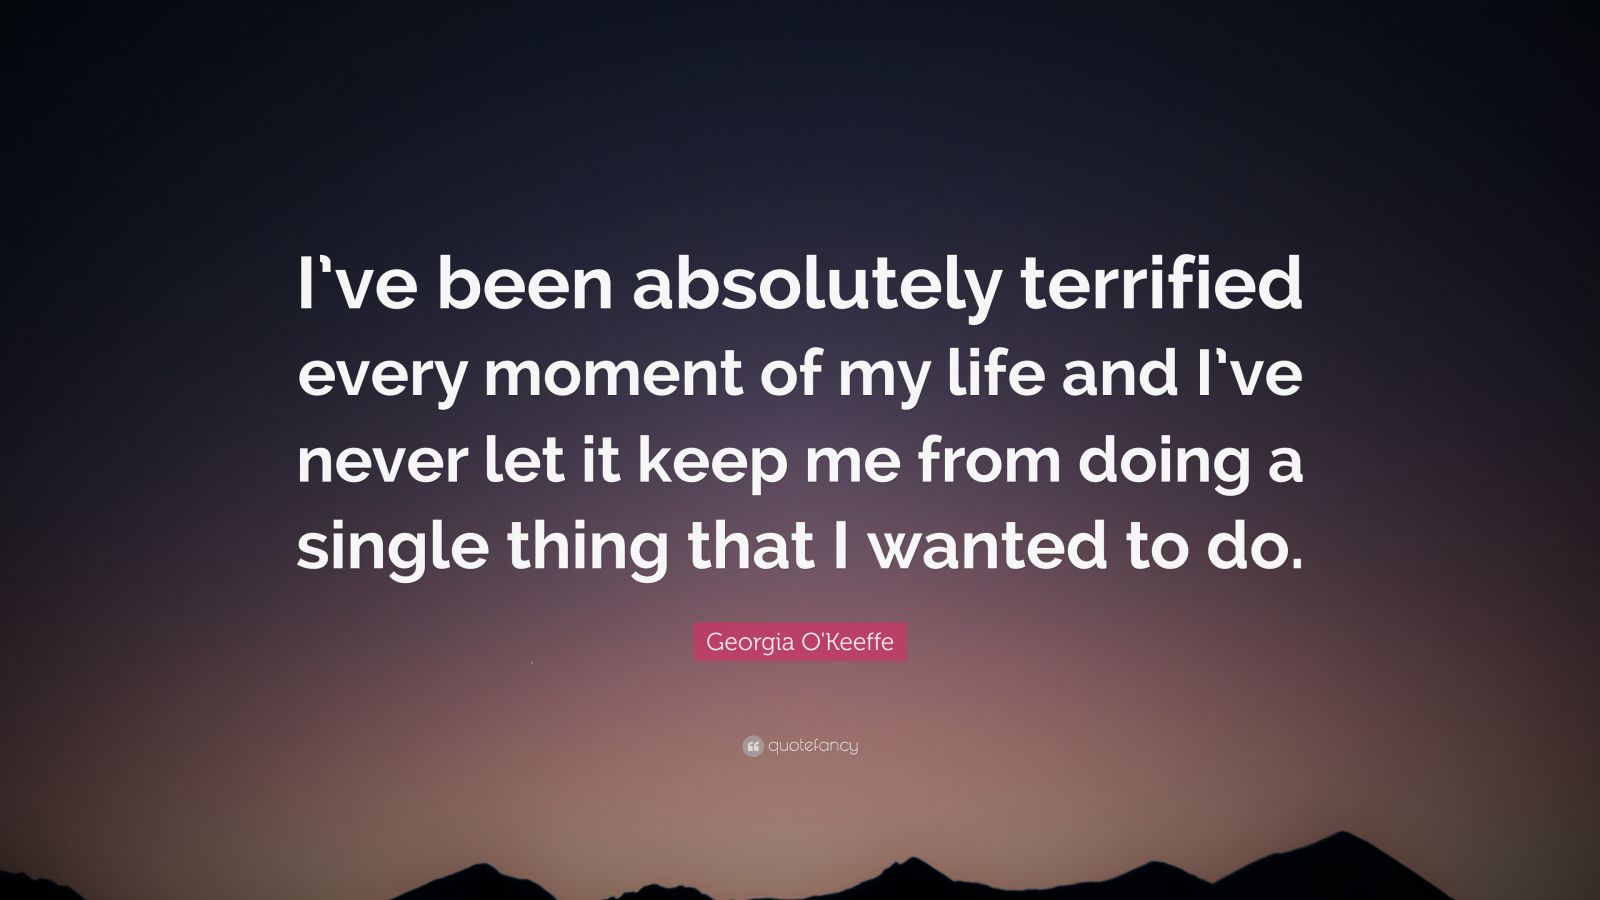 Georgia O Keeffe Quote I Ve Been Absolutely Terrified Every Moment Of My Life And I Ve Never